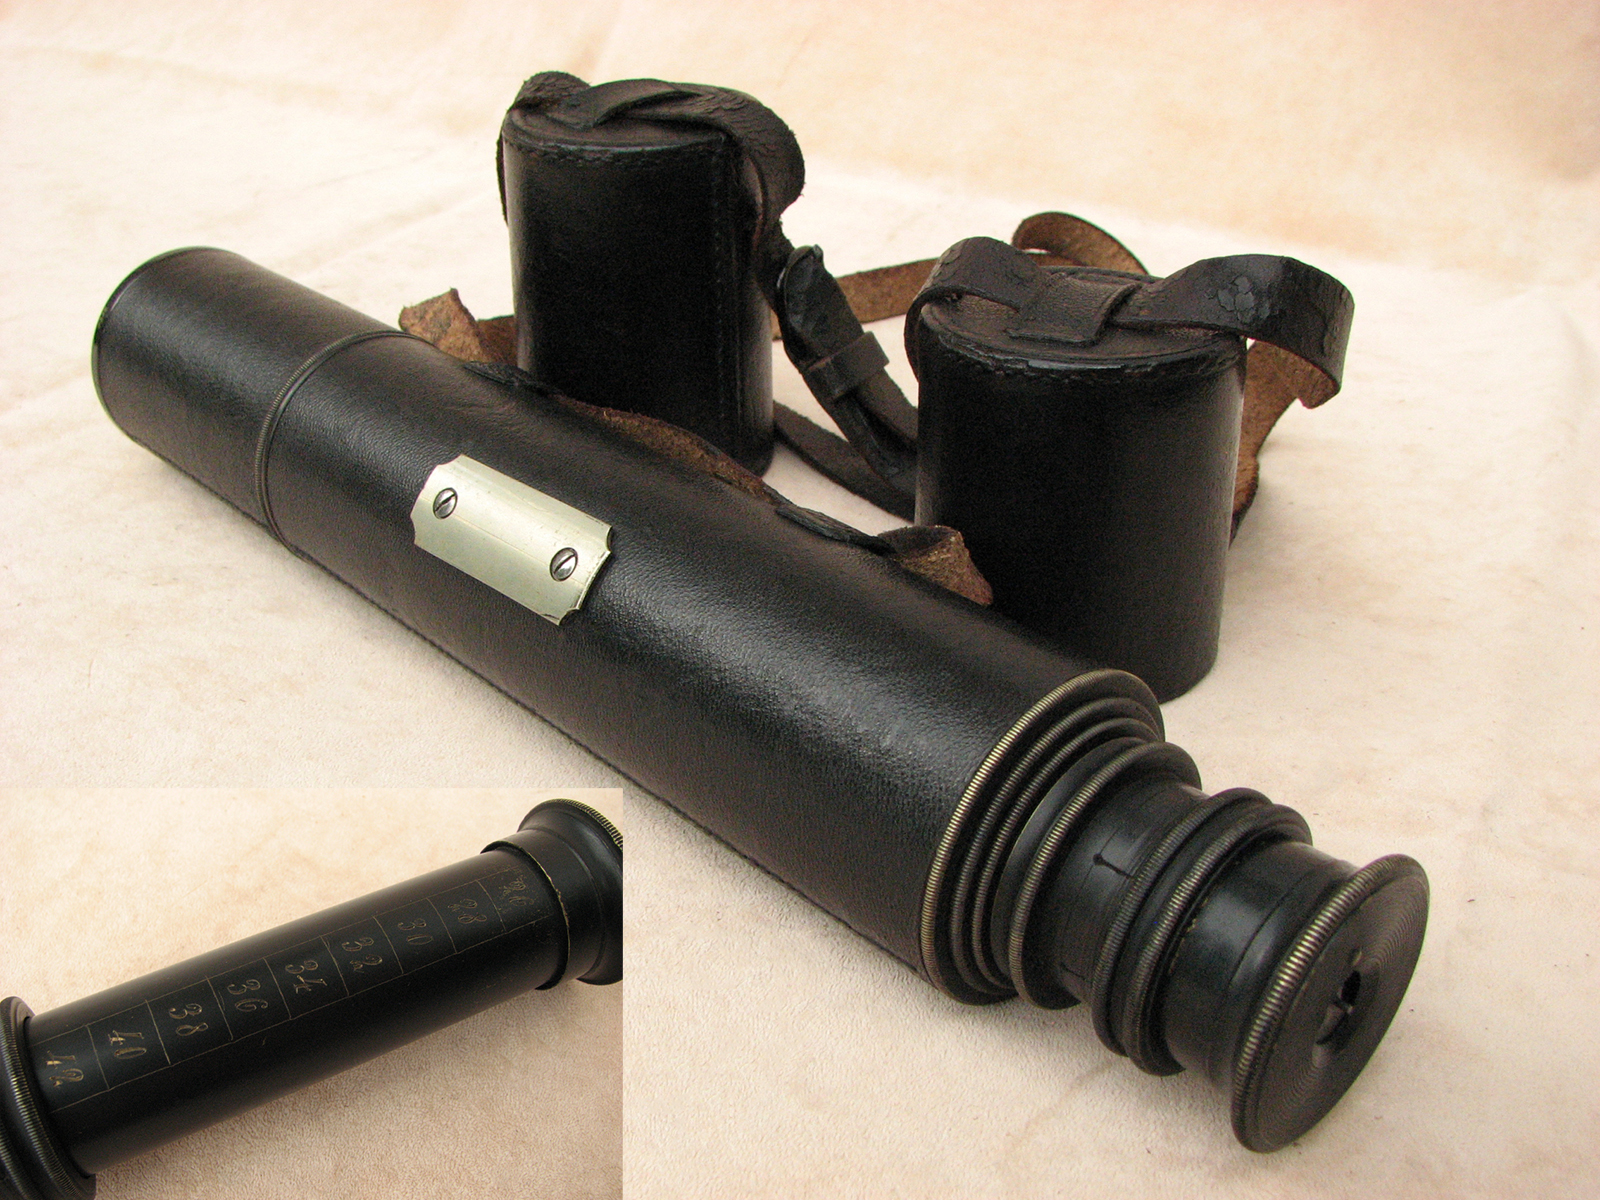 Late 19th century pancratic telescope giving 9 levels of magnification up to 42x